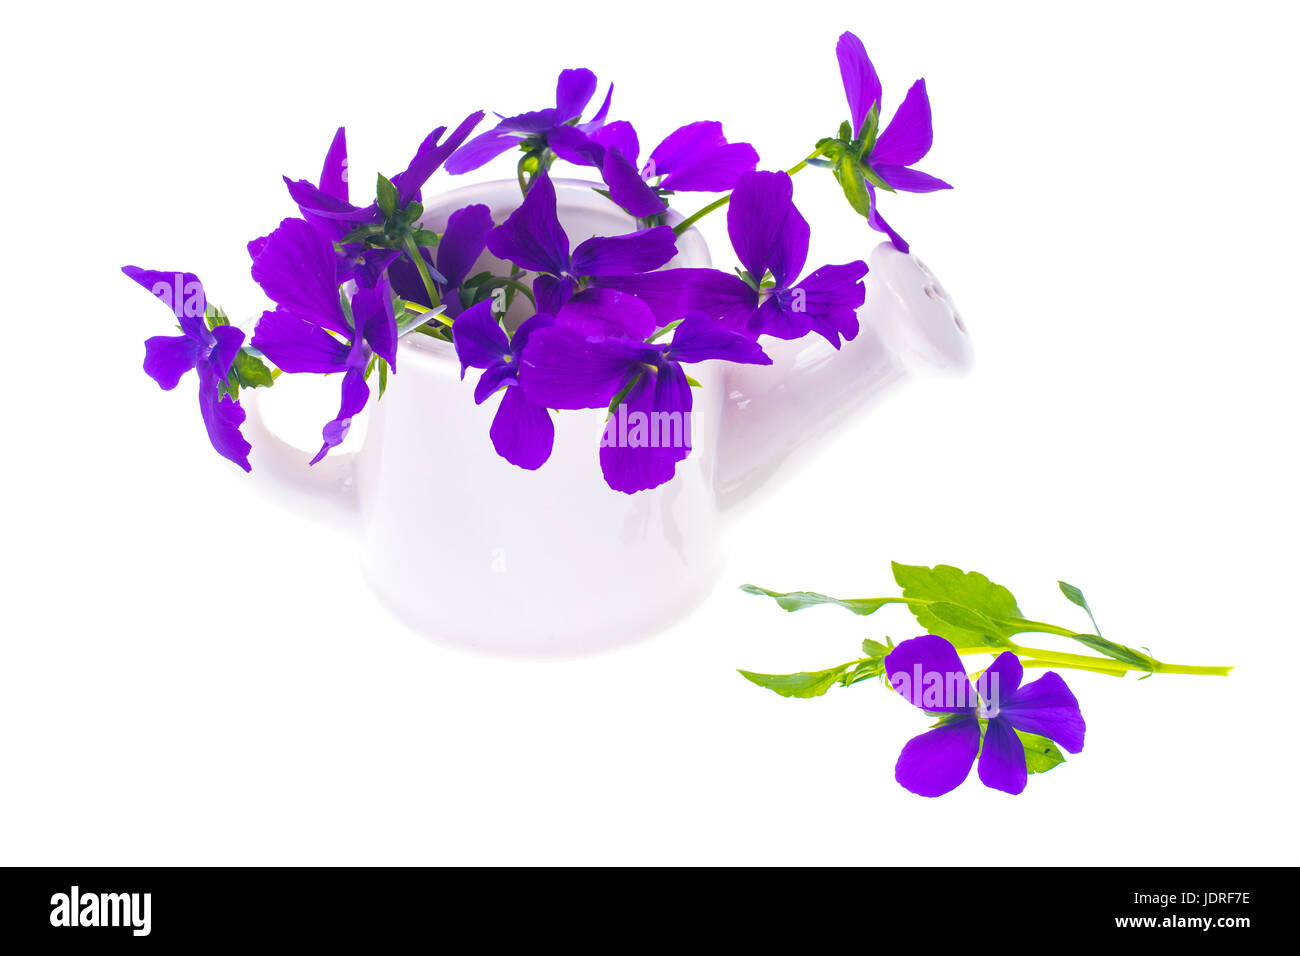 Isolated Garden design-bouquet of purple flowers in white watering can. Studio Photo Stock Photo